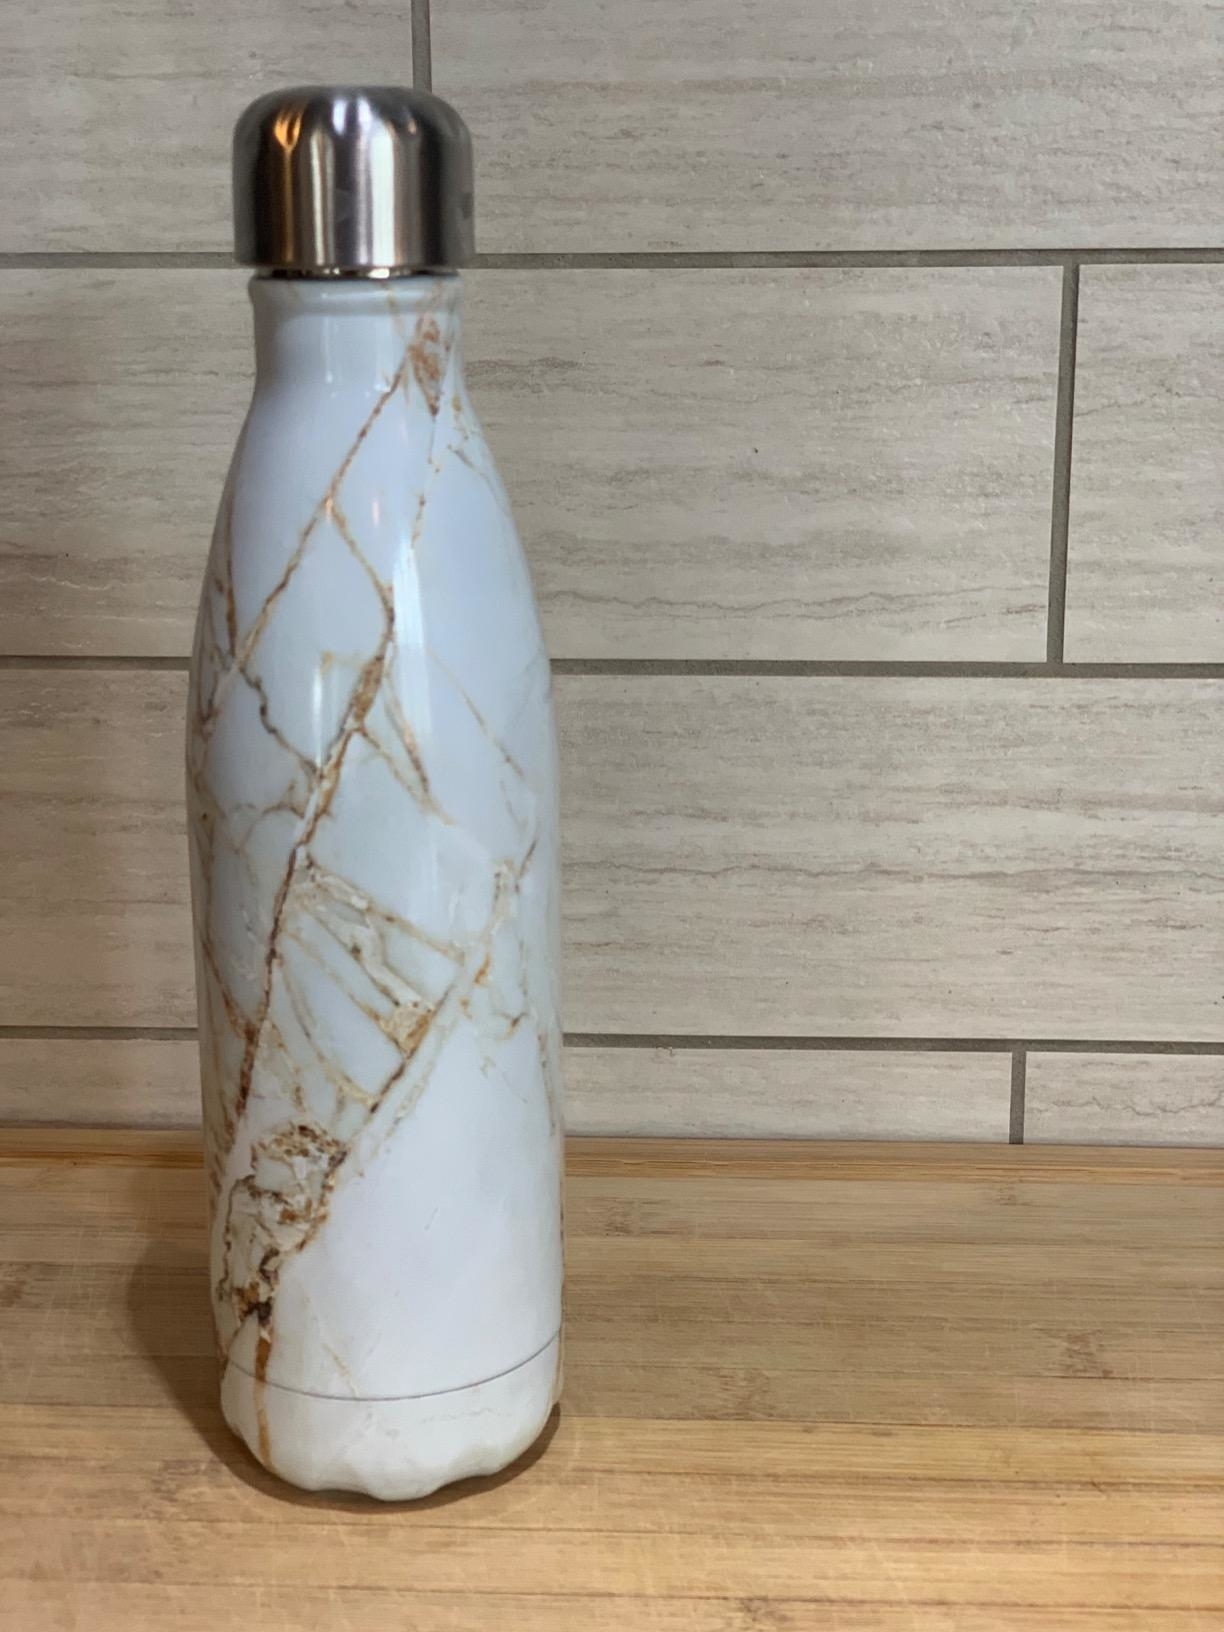 Insulated bottle with a marble design on a wooden surface against a tiled wall